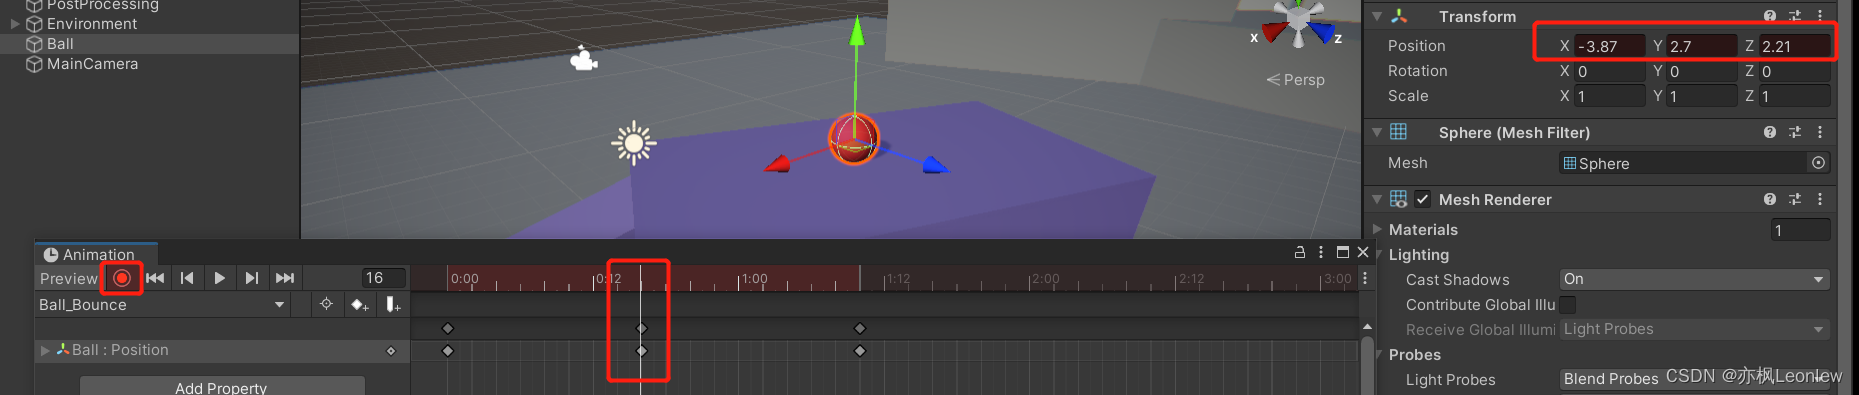 Unity Animation -- Overview